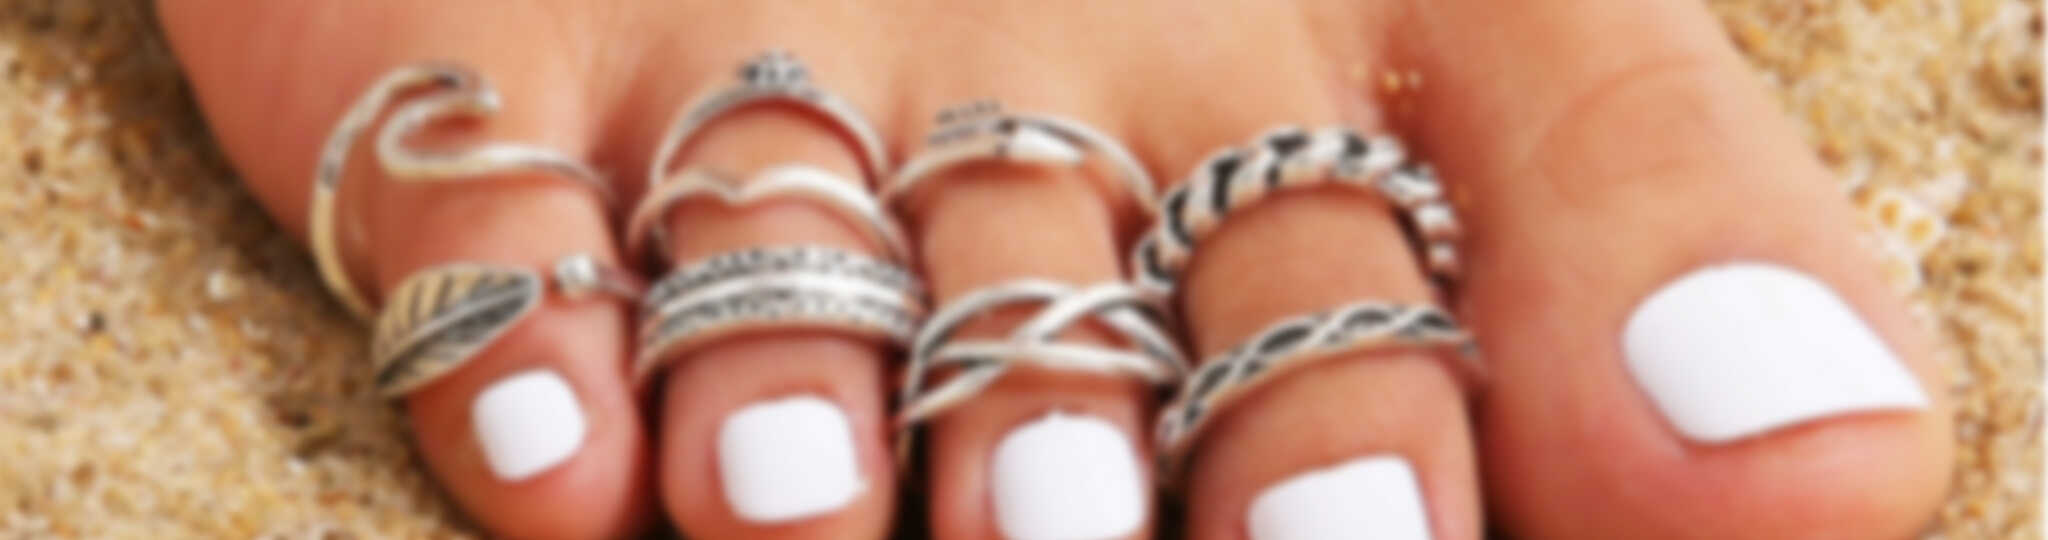 Toe rings at OFILLE.